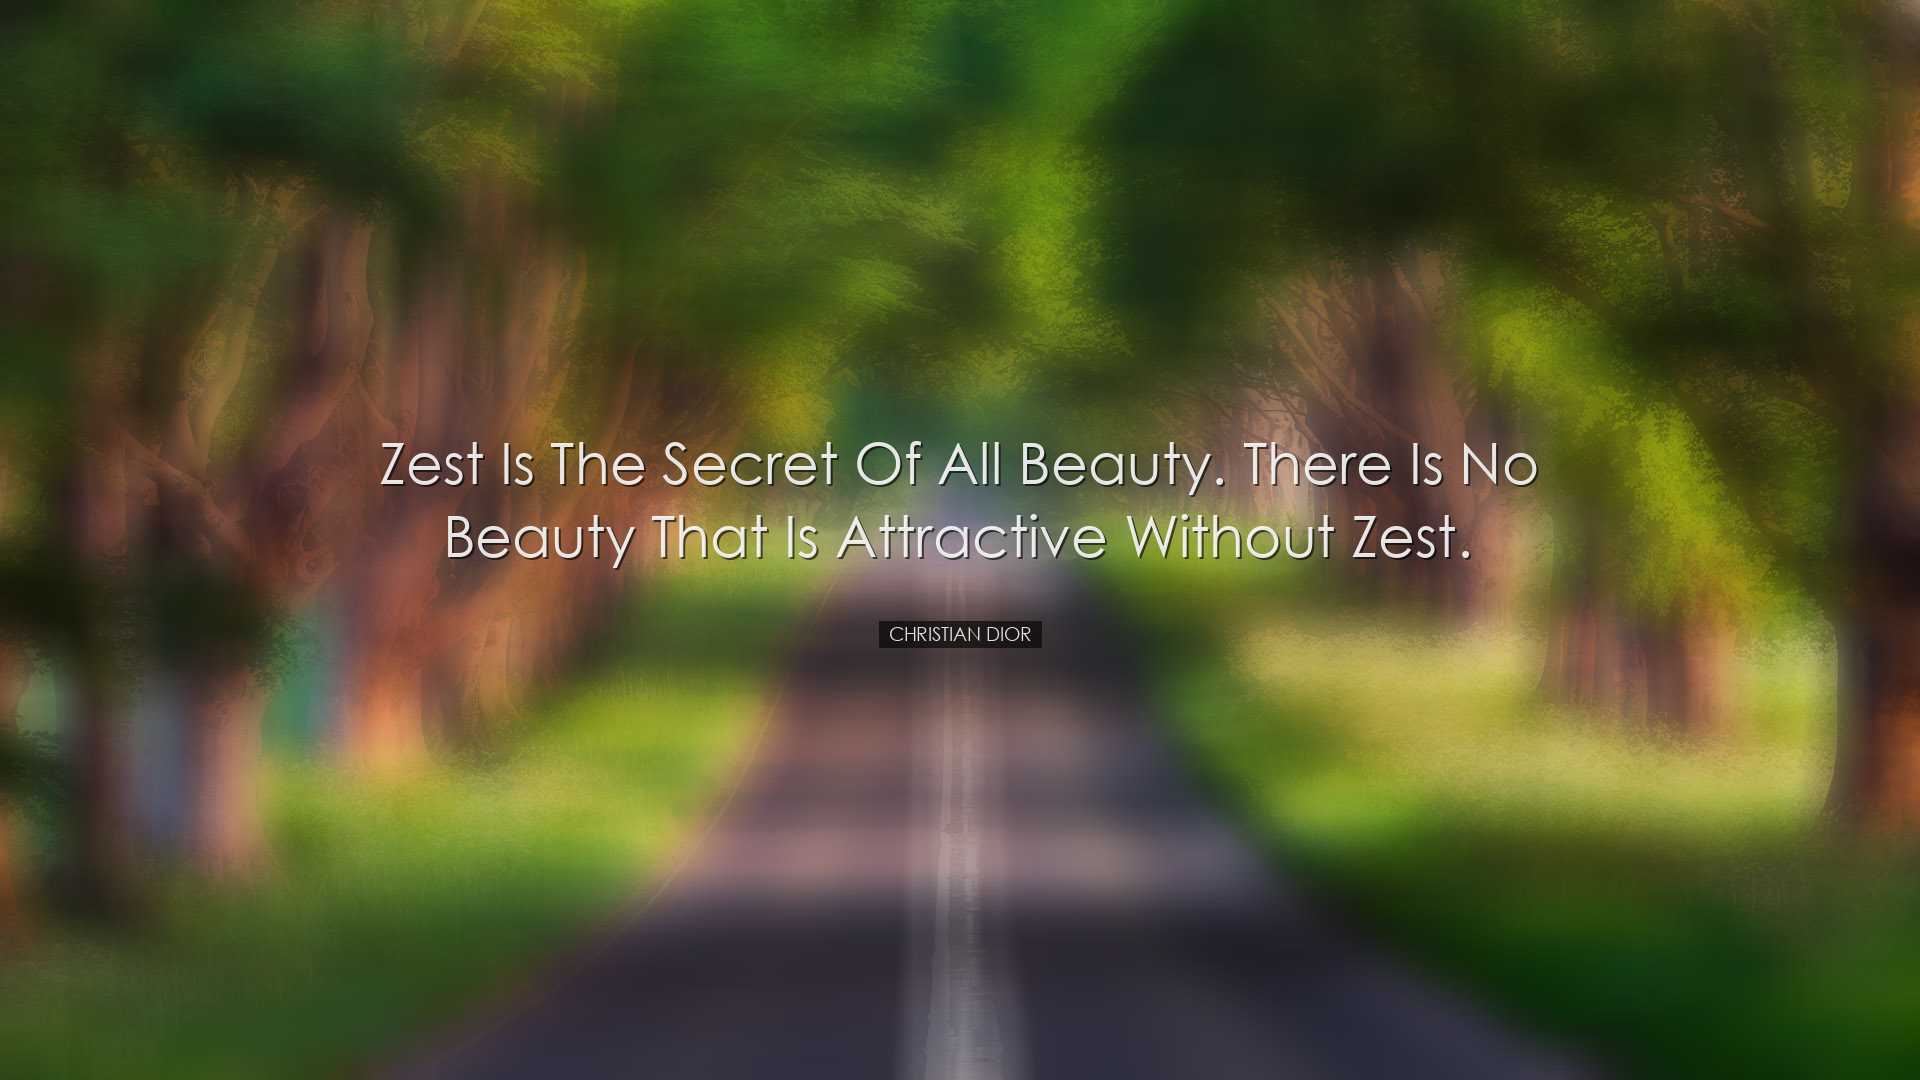 Zest is the secret of all beauty. There is no beauty that is attra